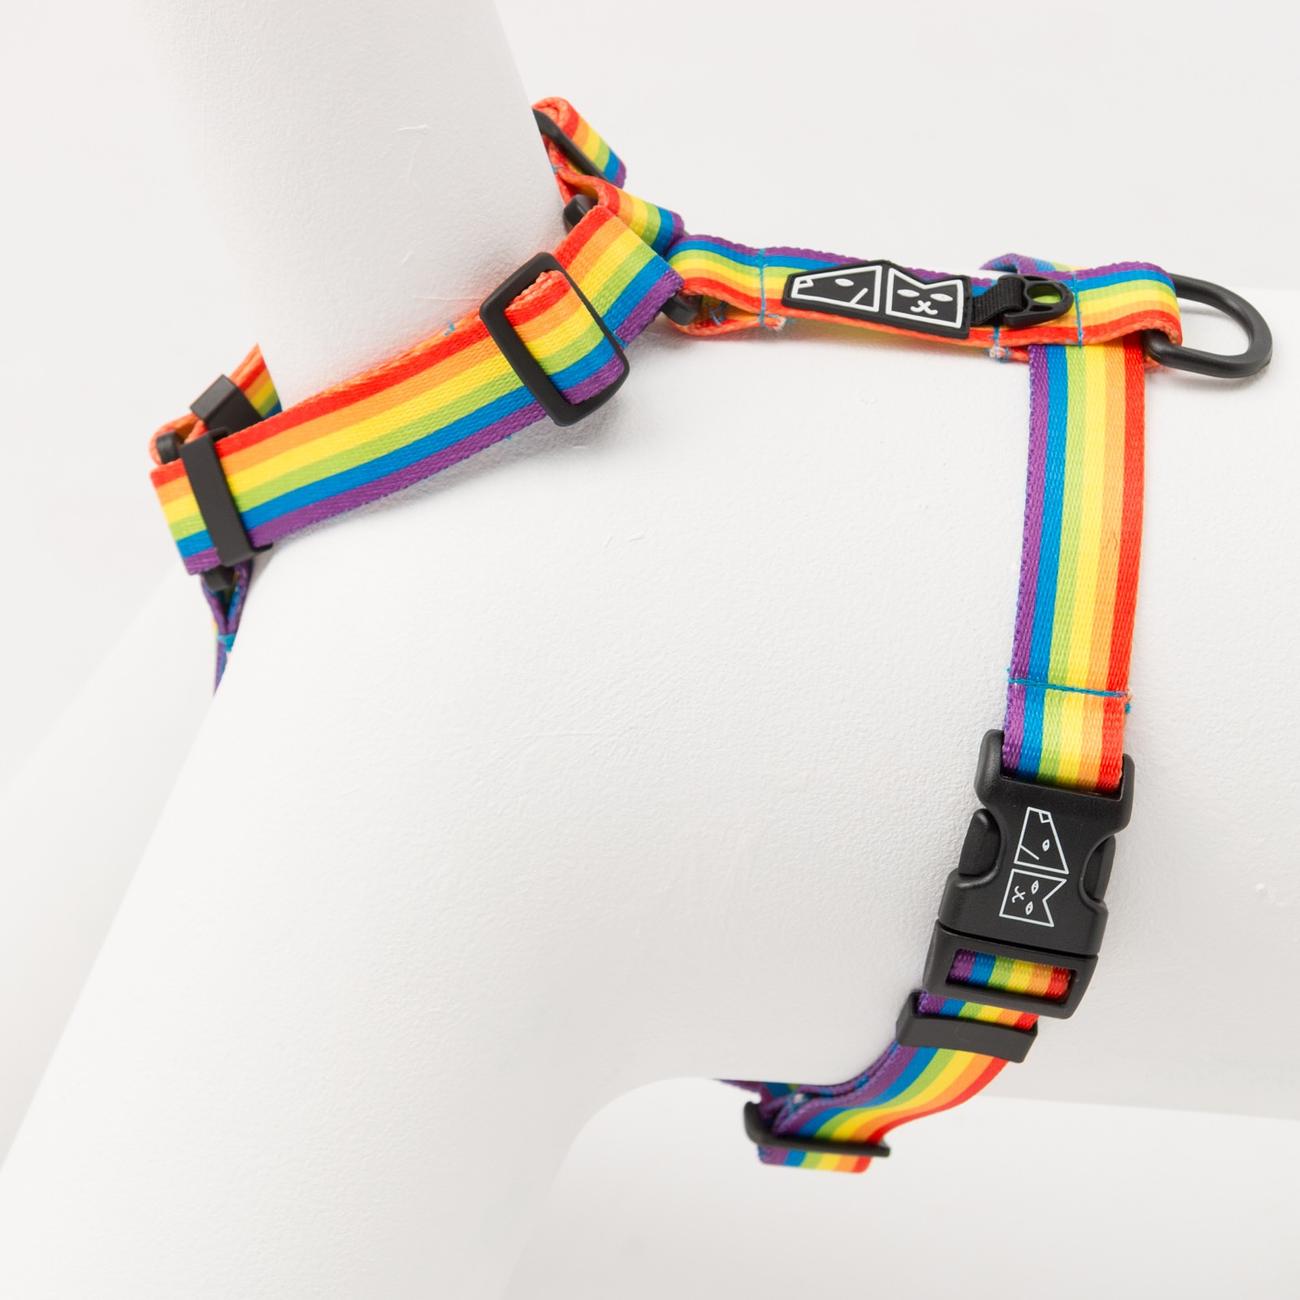 Stay-on guard harness "Love, equality, teethers"